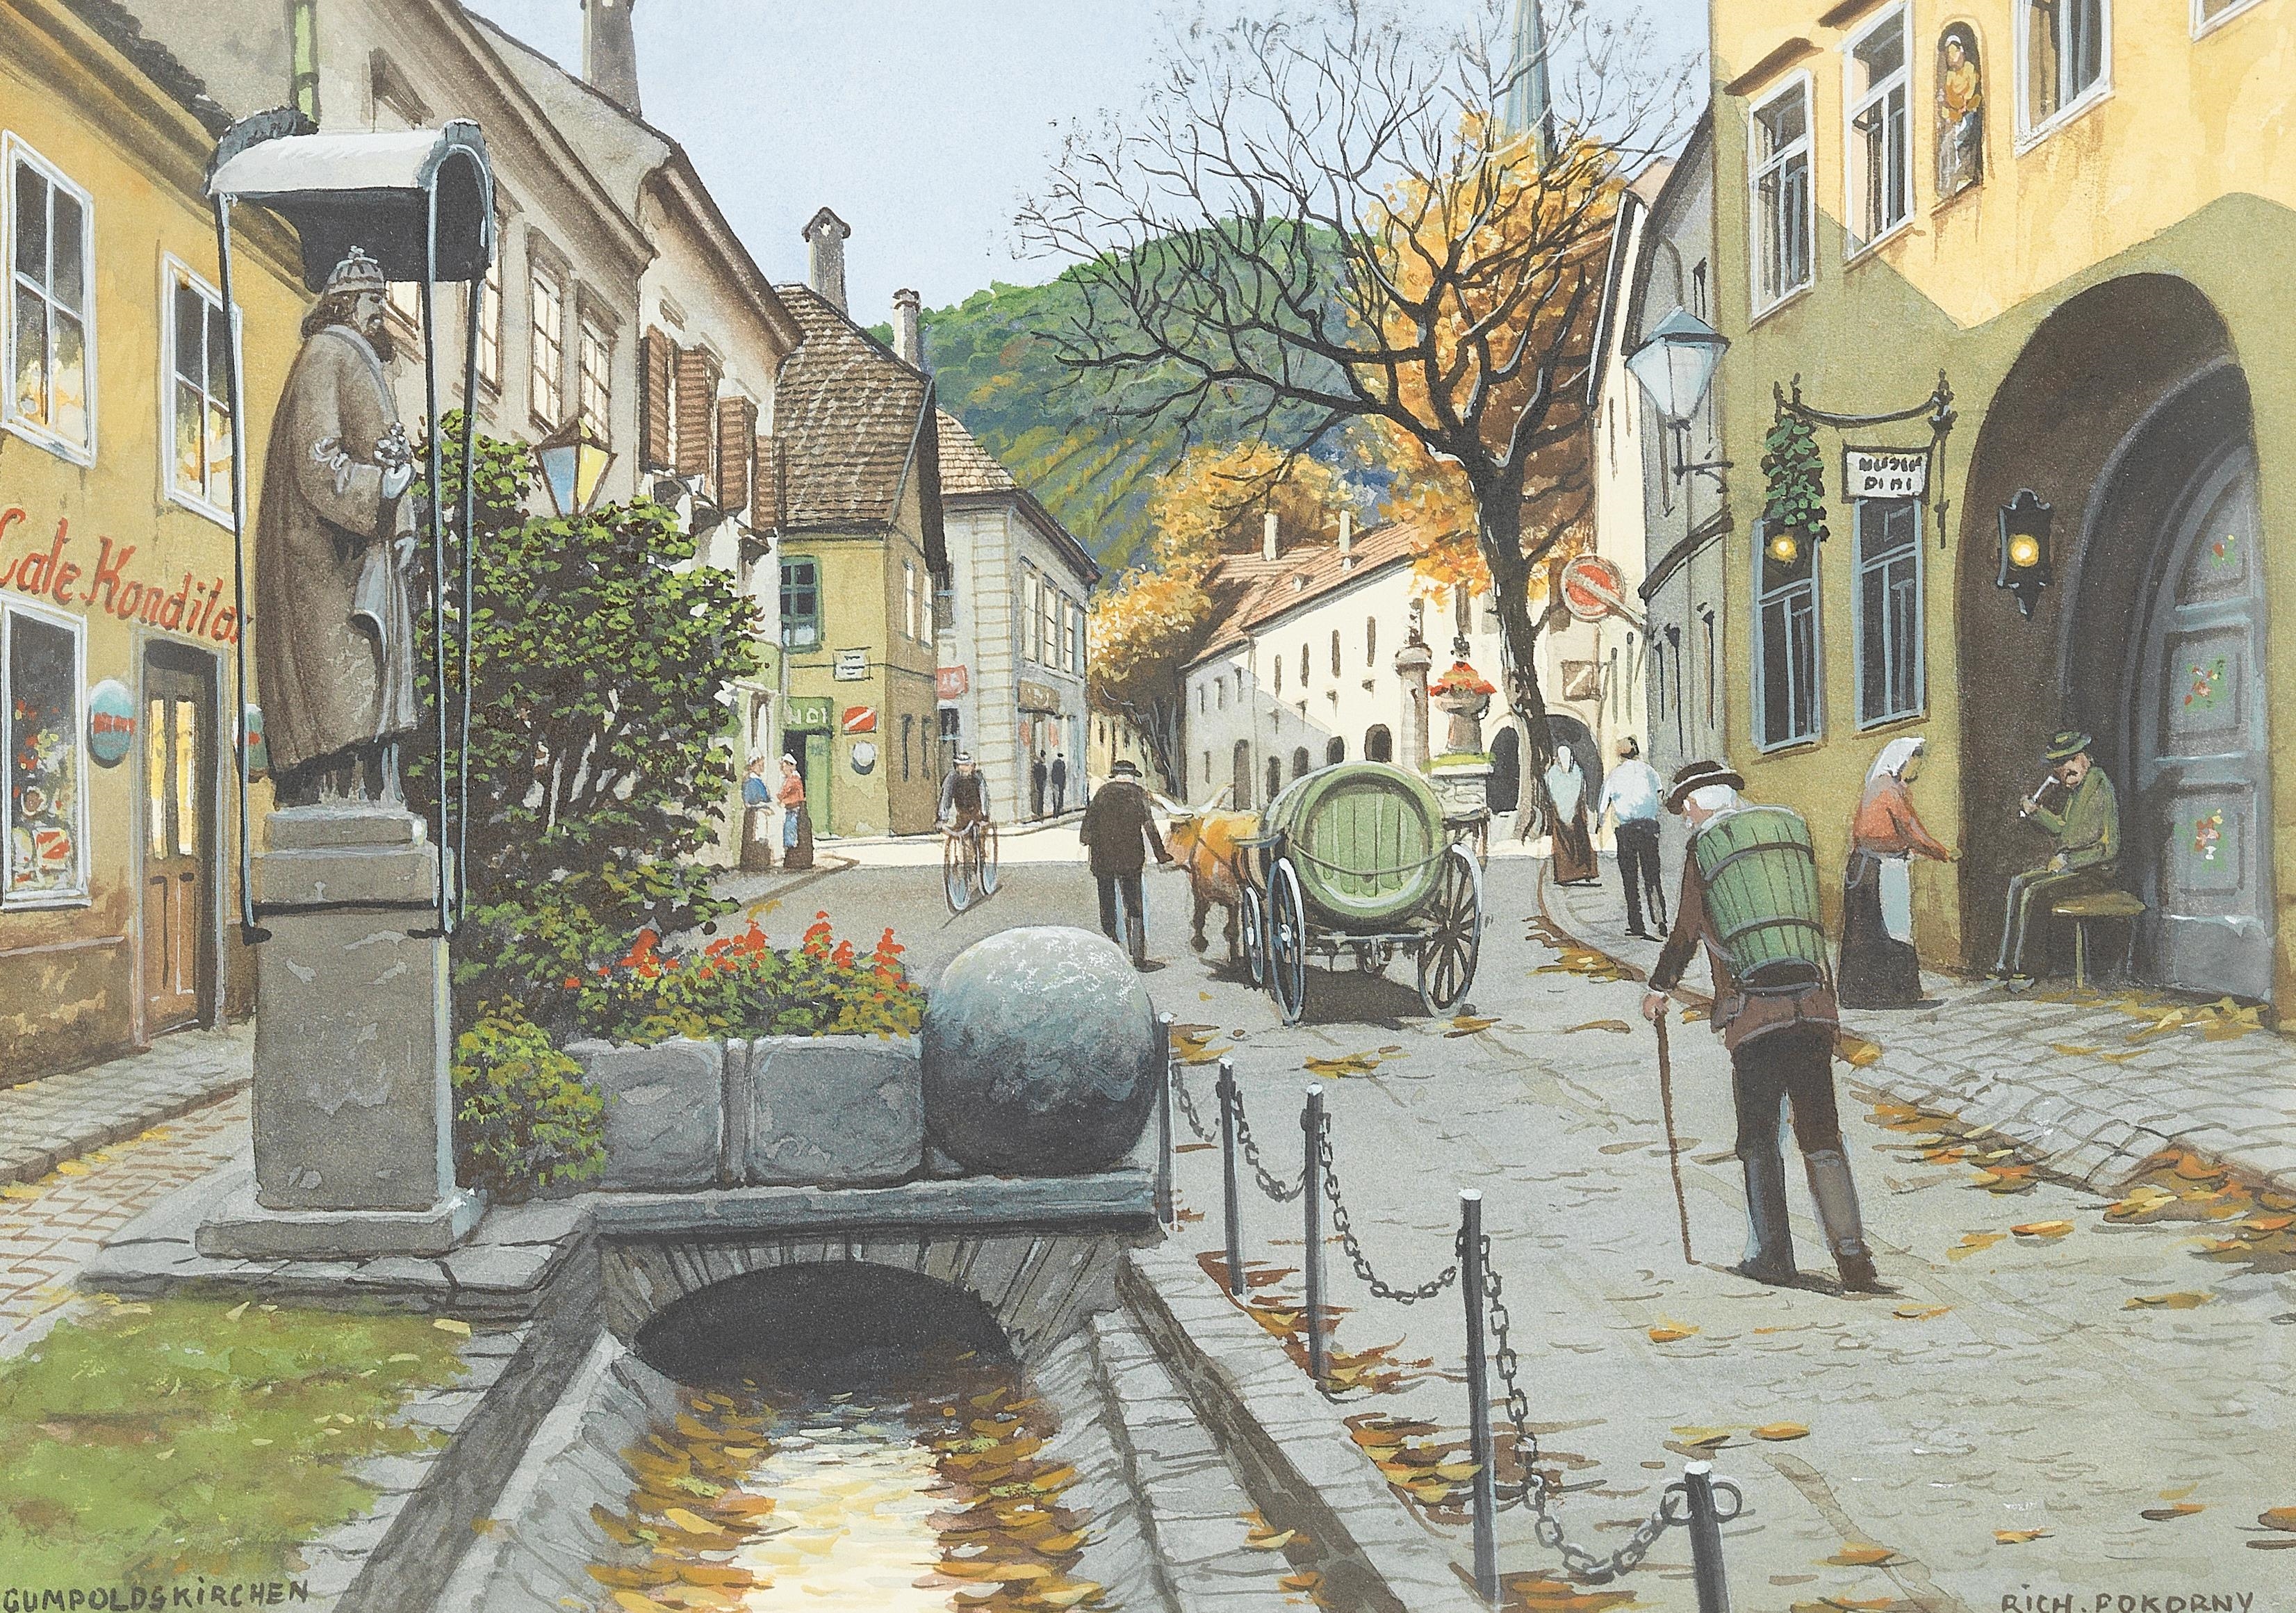 Artwork by Richard Pokorny, "Gumpoldskirchen", Made of watercolour on paper